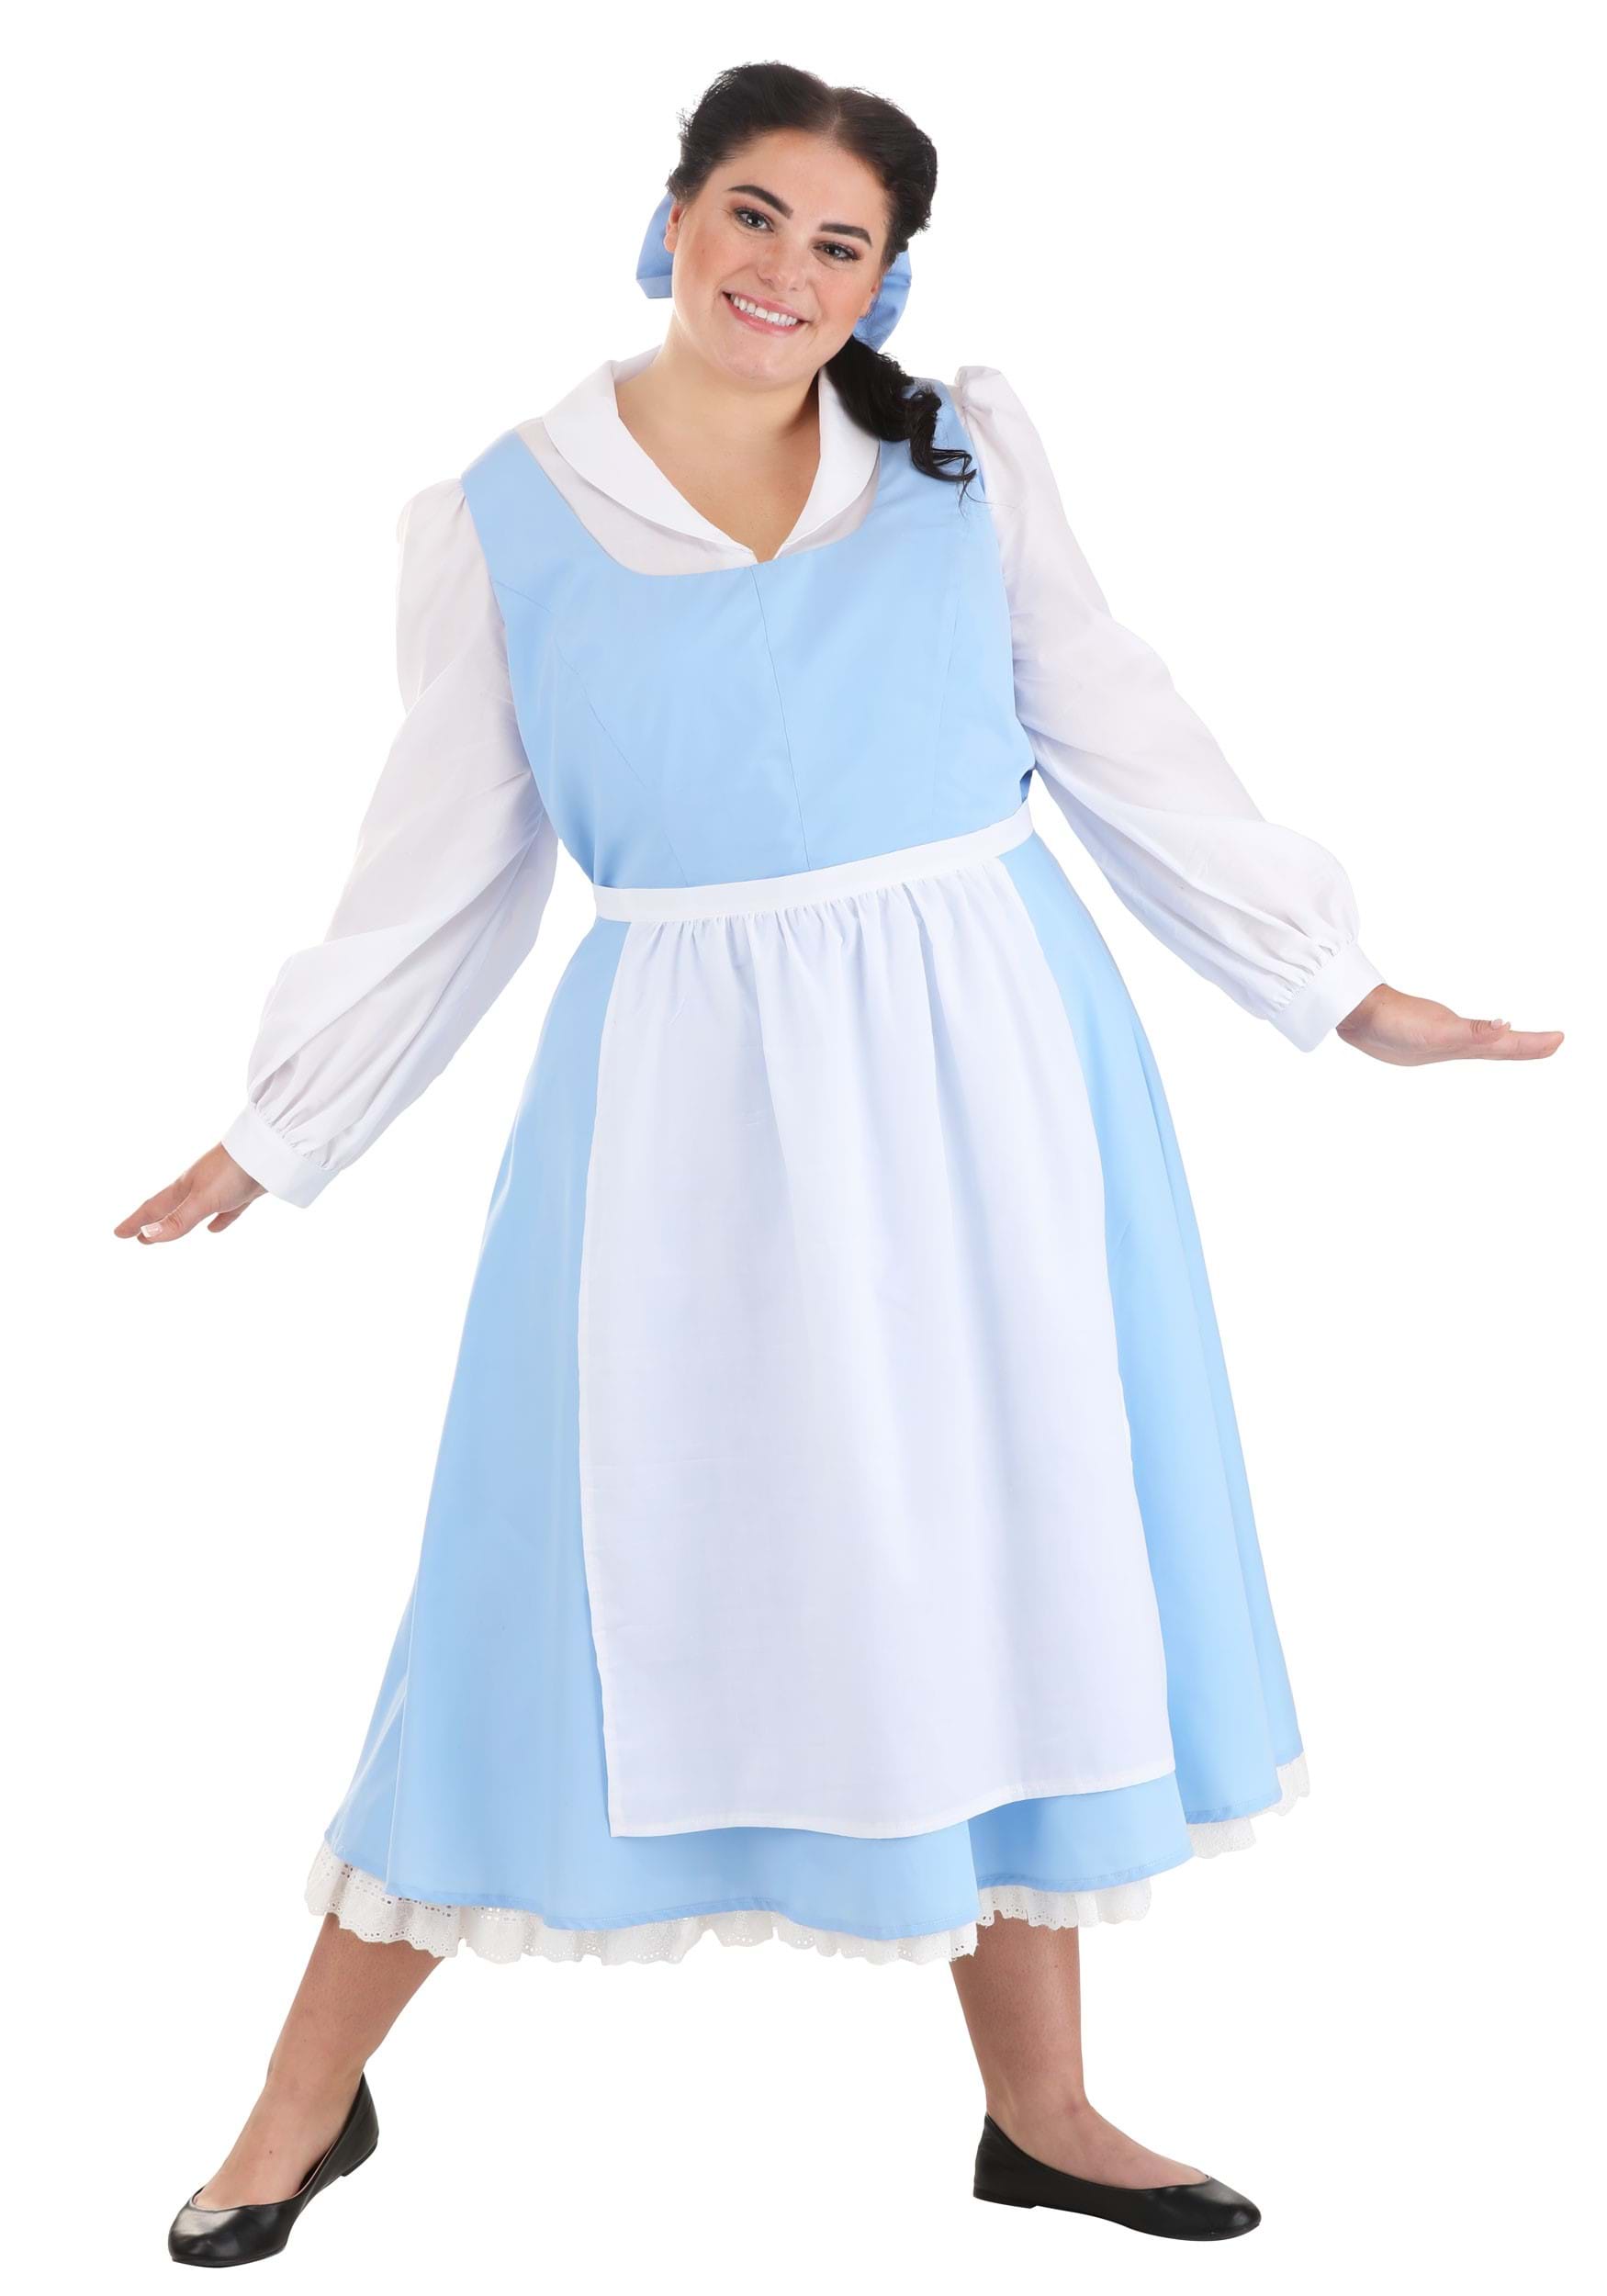 Photos - Fancy Dress A&D FUN Costumes Beauty and the Beast Plus Size Belle Blue Costume Dress for W 